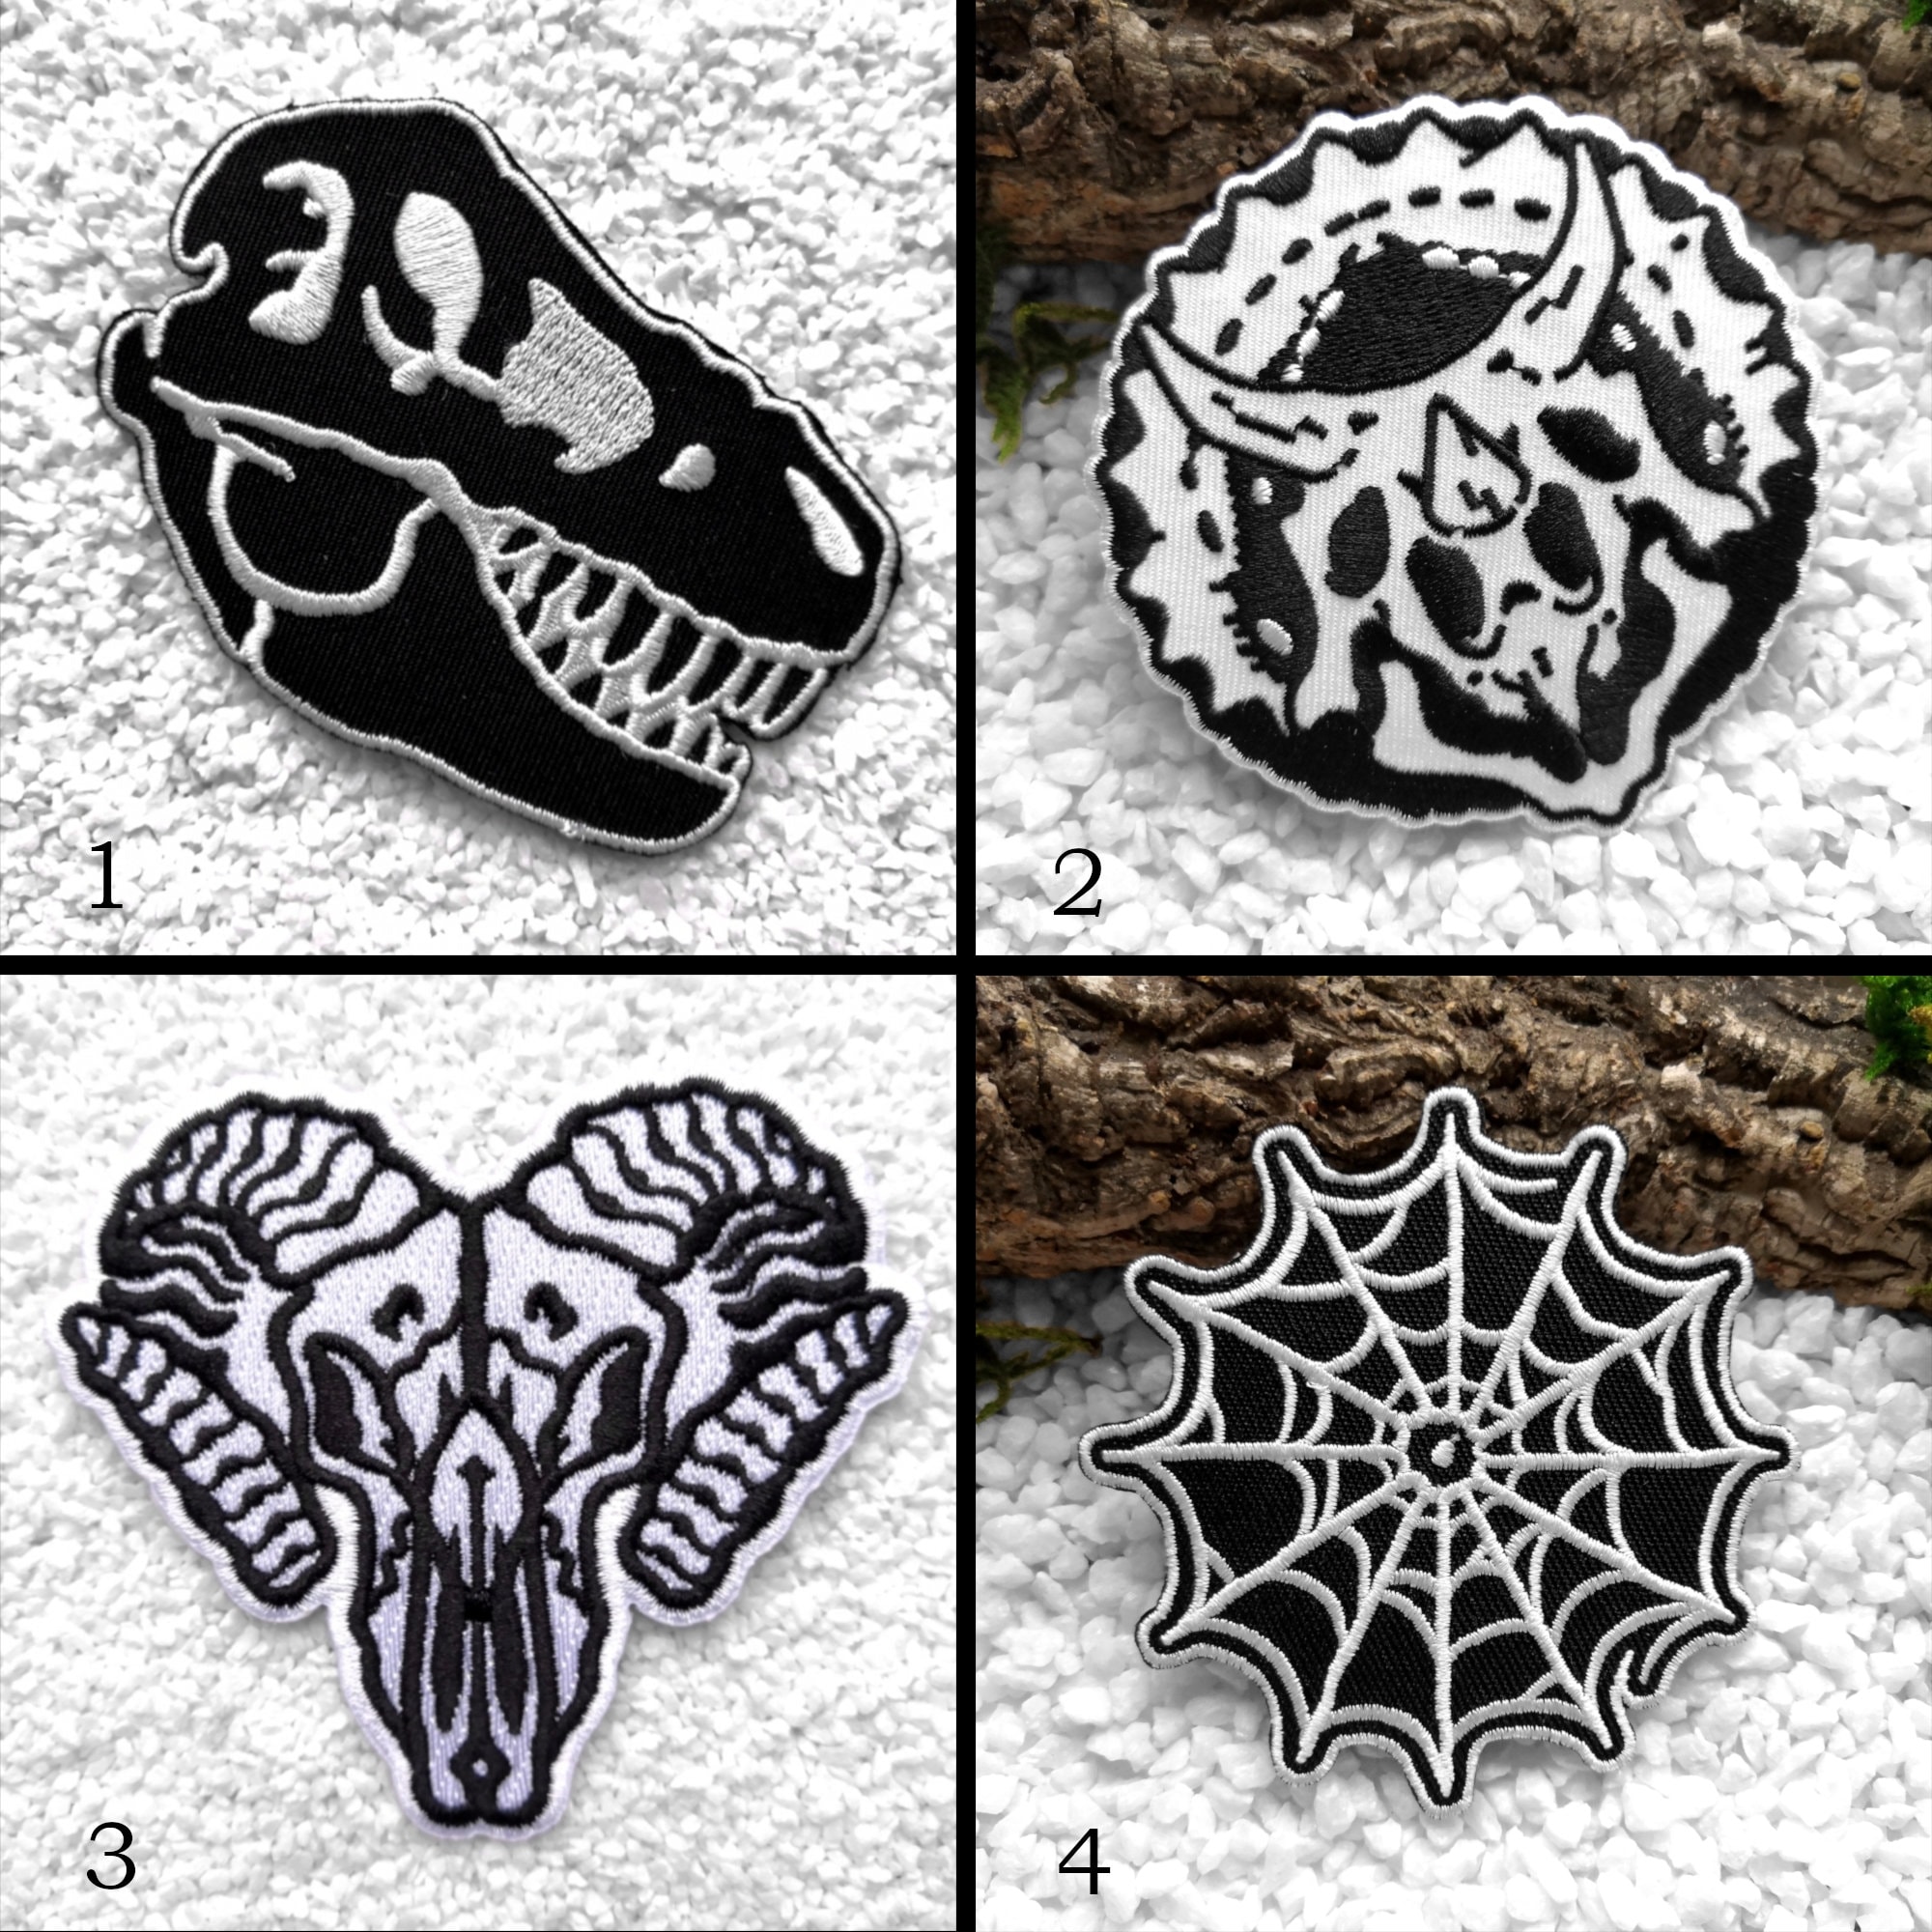 HUGE Black Wicked Ram Skull Patch Iron on Patch or Sew on Pagen Punk Gothic Goth  Patch